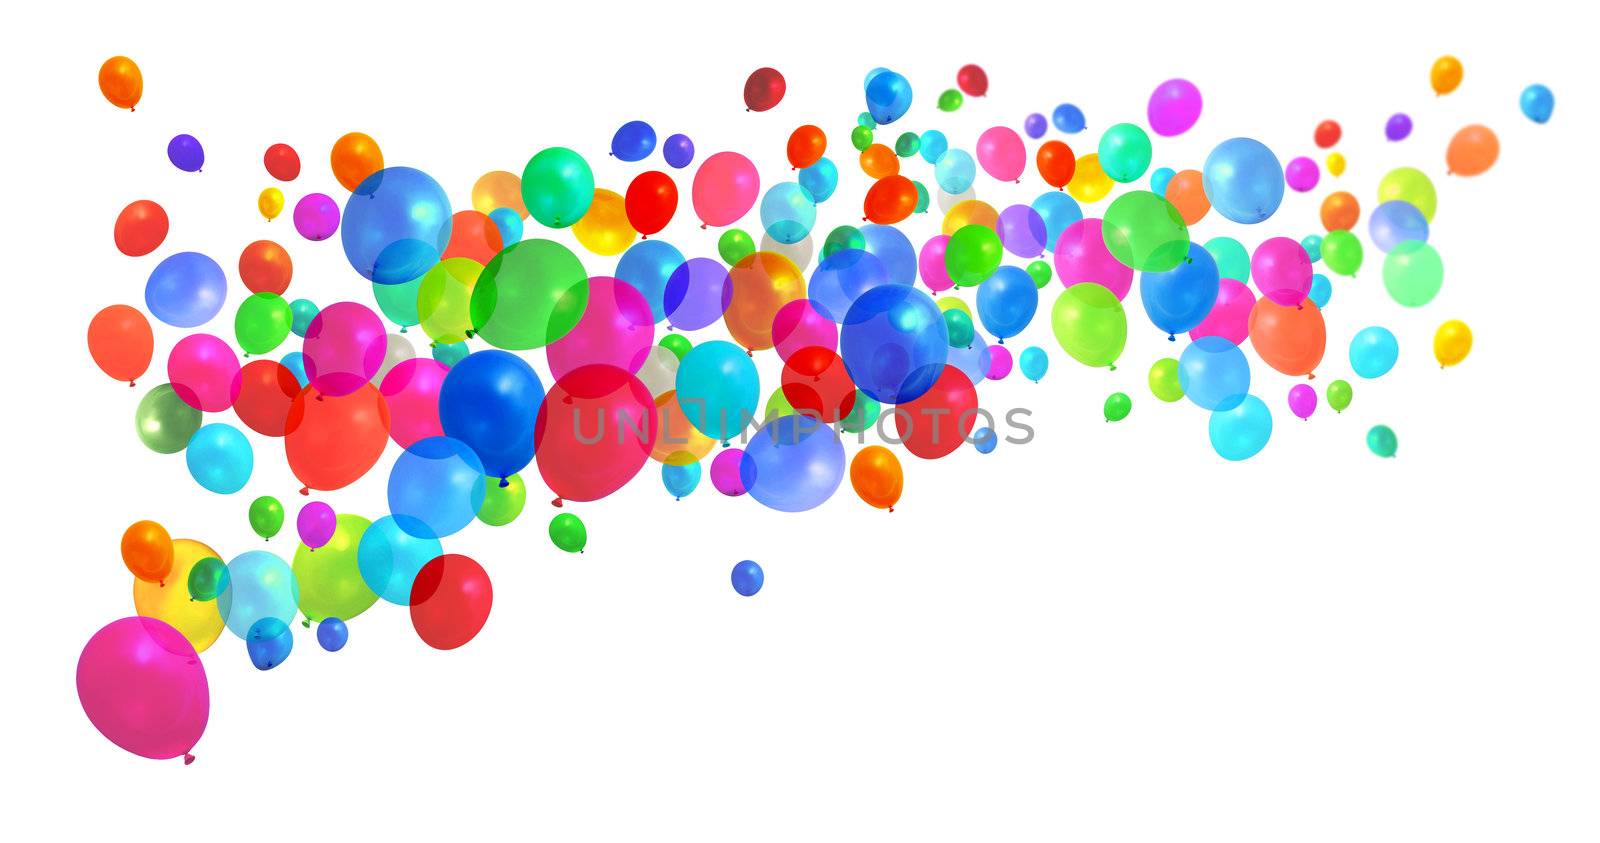 Lots of colorful birthday party balloons flying on white background